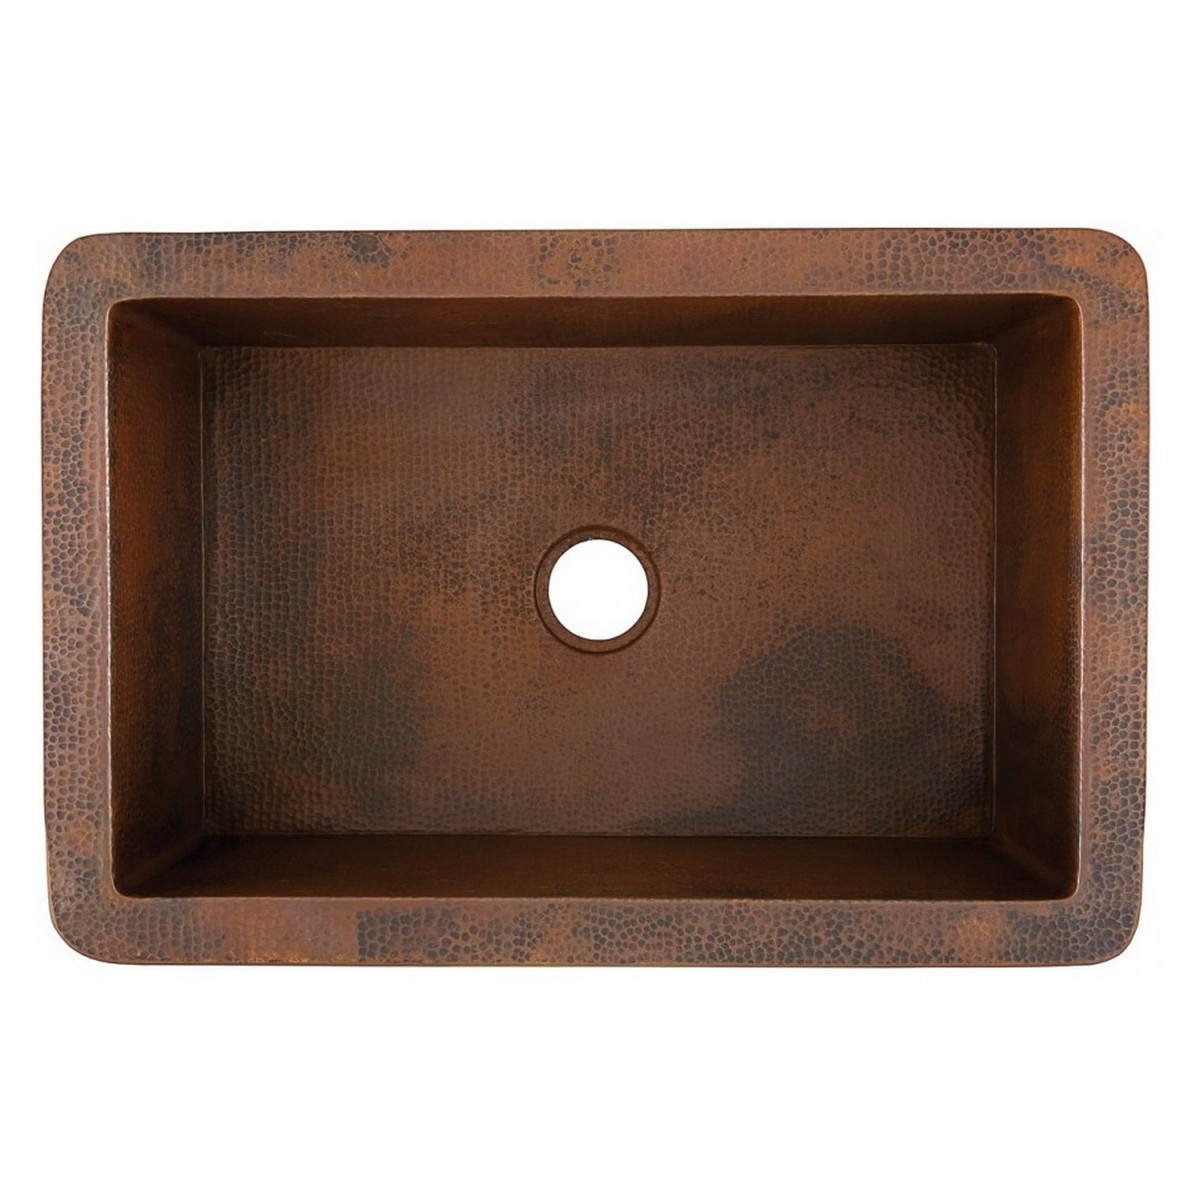 THOMPSON TRADERS 2KS CARDENAS 33 INCH DROP-IN OR UNDERMOUNT SINGLE BOWL KITCHEN SINK IN AGED COPPER